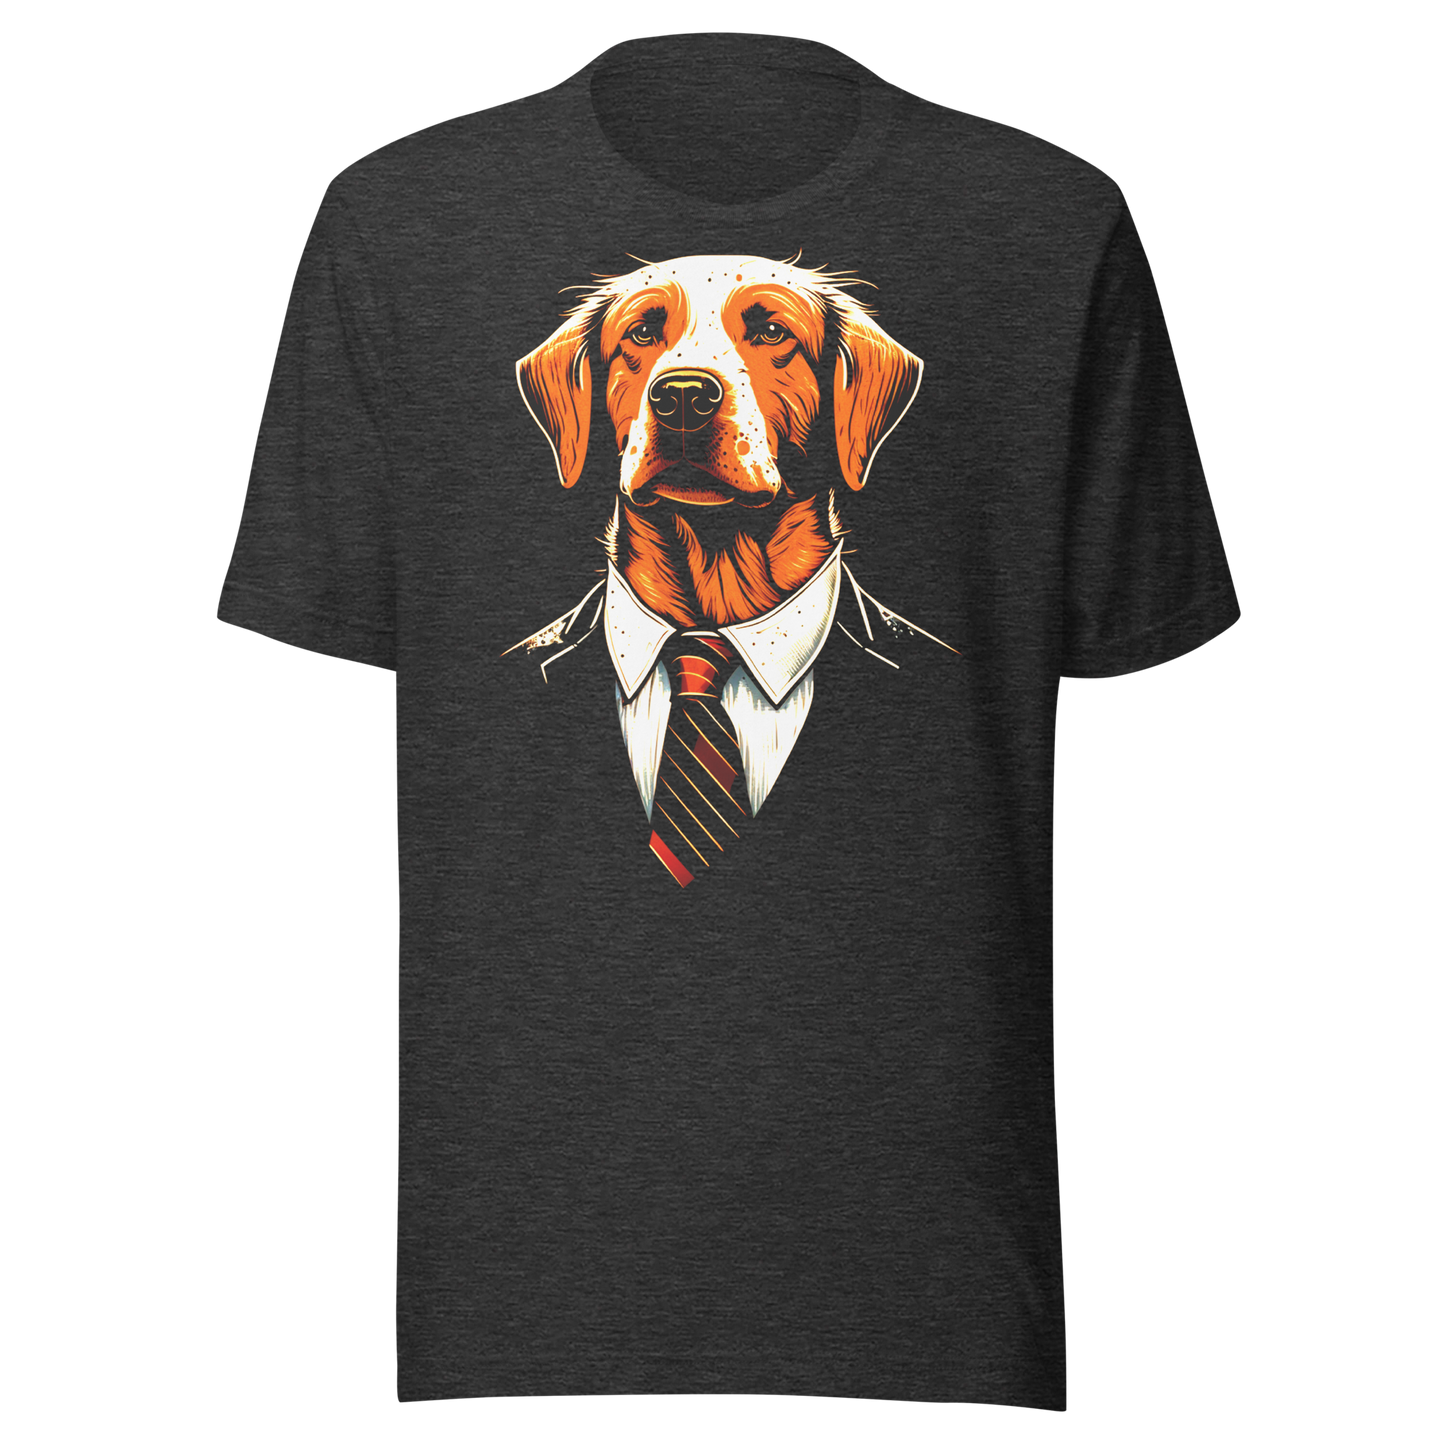 Wise Dog Unisex T-shirt with a Clever and Melancholic Look